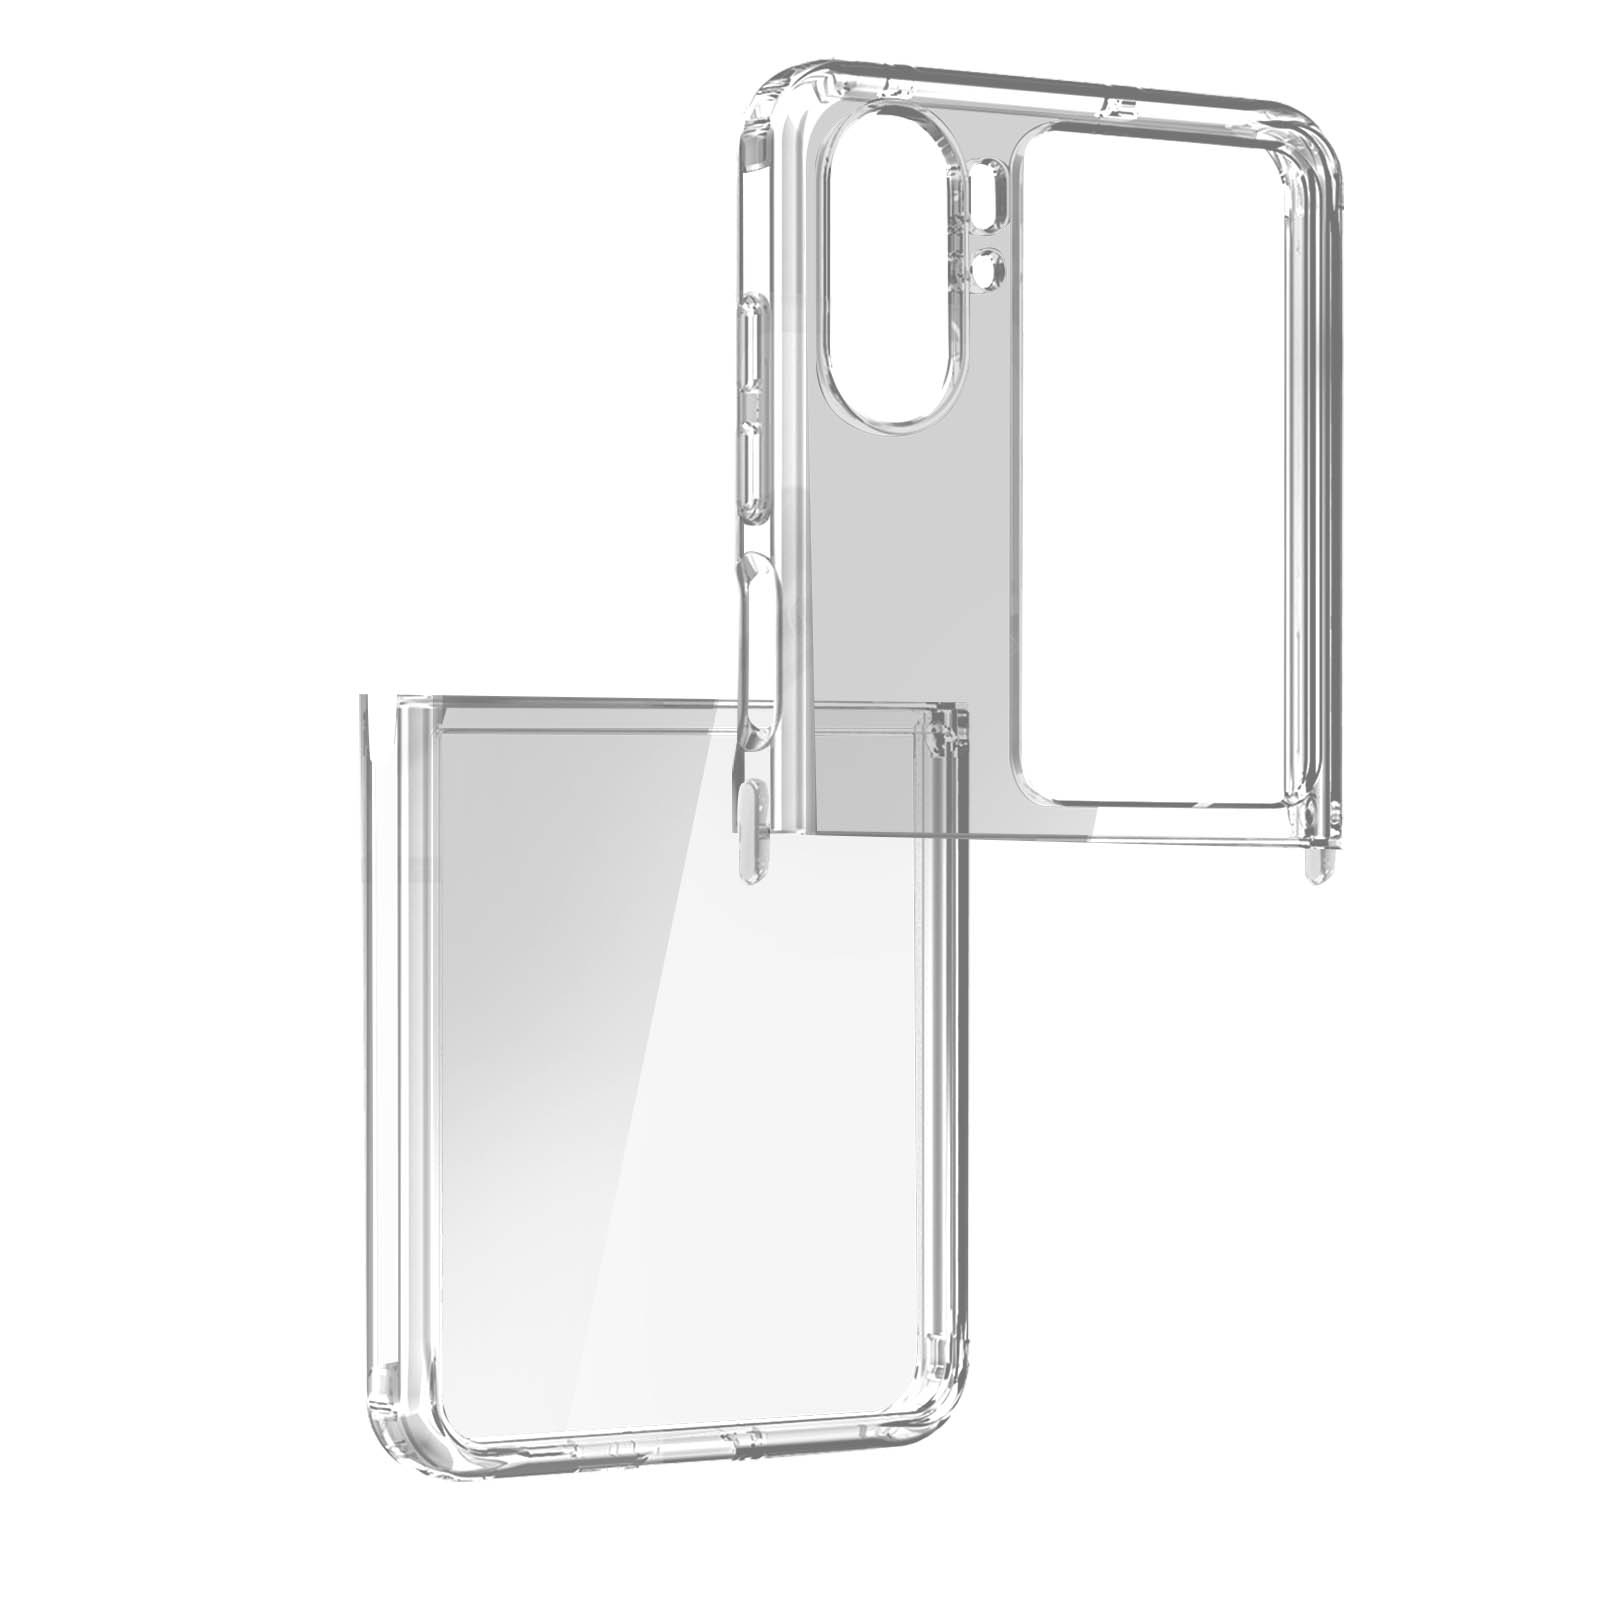 Series, DUX DUCIS Find Oppo, Clin Flip, Backcover, Transparent N2